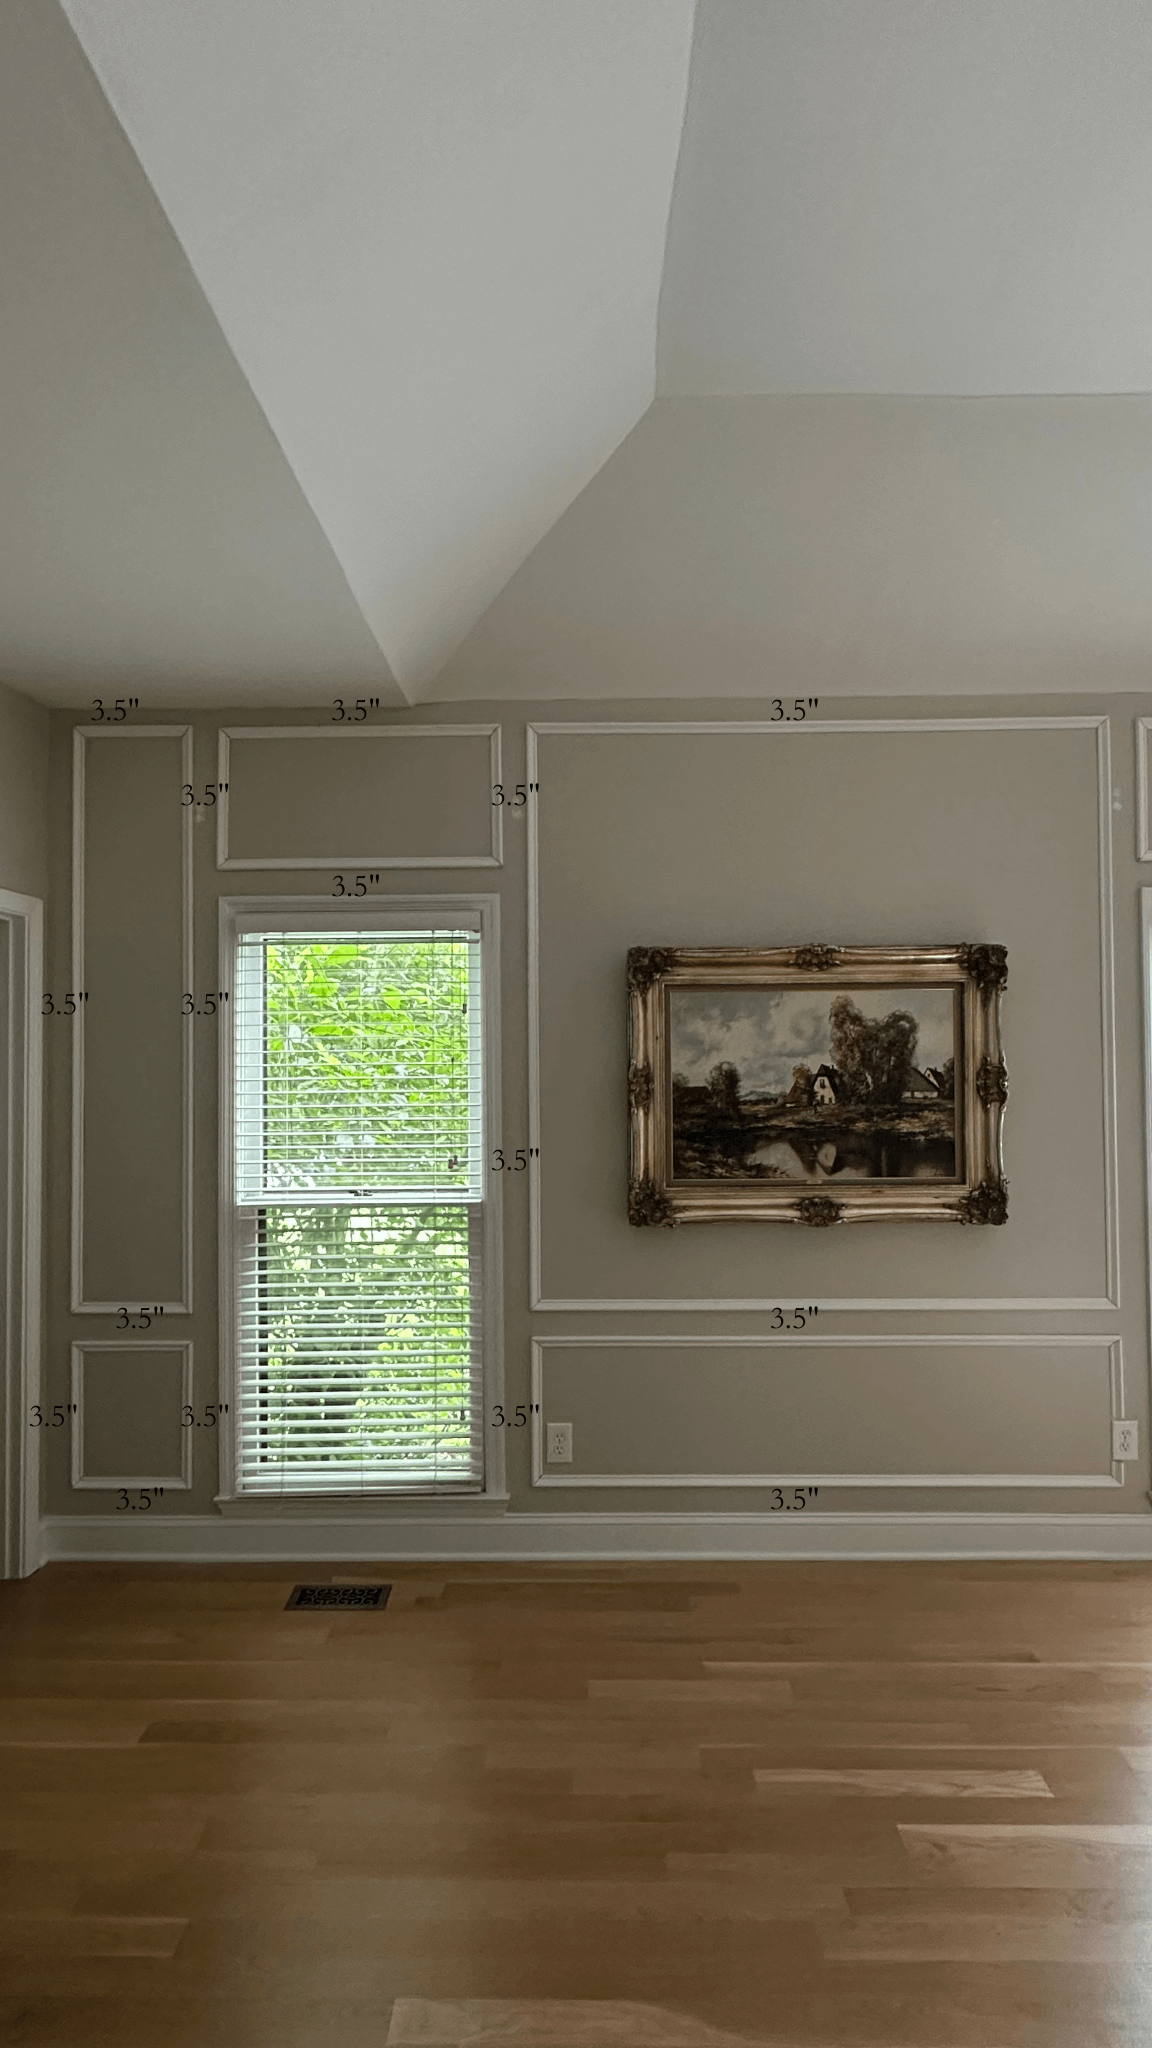 click-to-learn-how-to-design-custom-trim